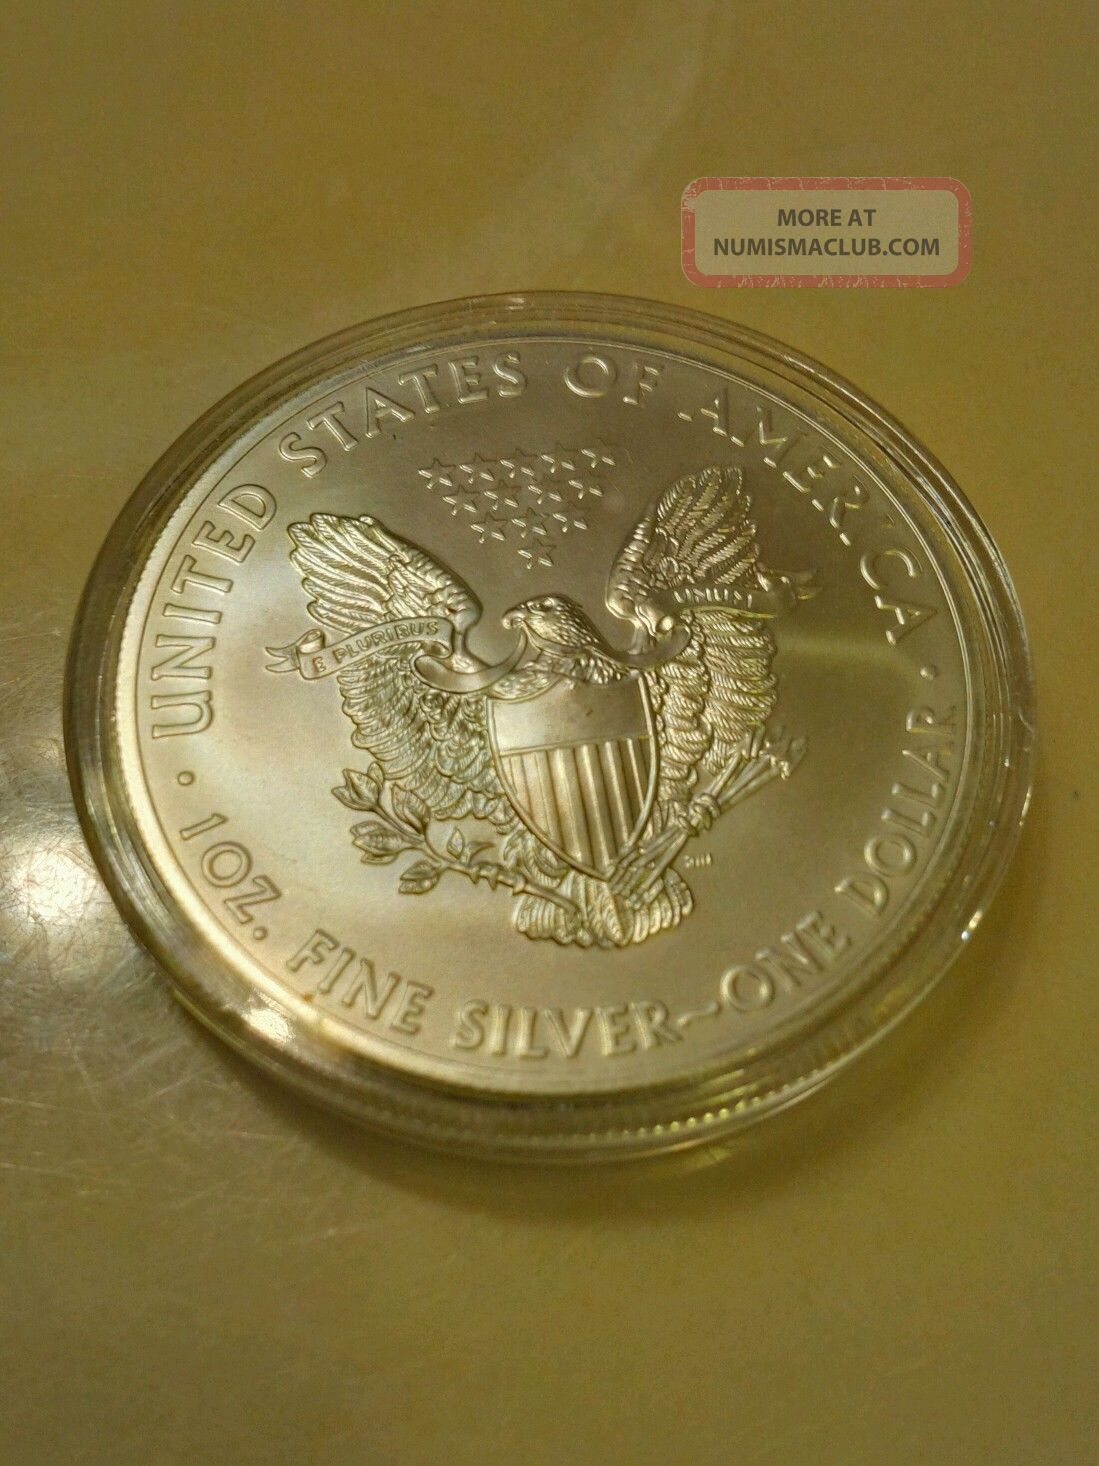 buy silver eagles from us mint